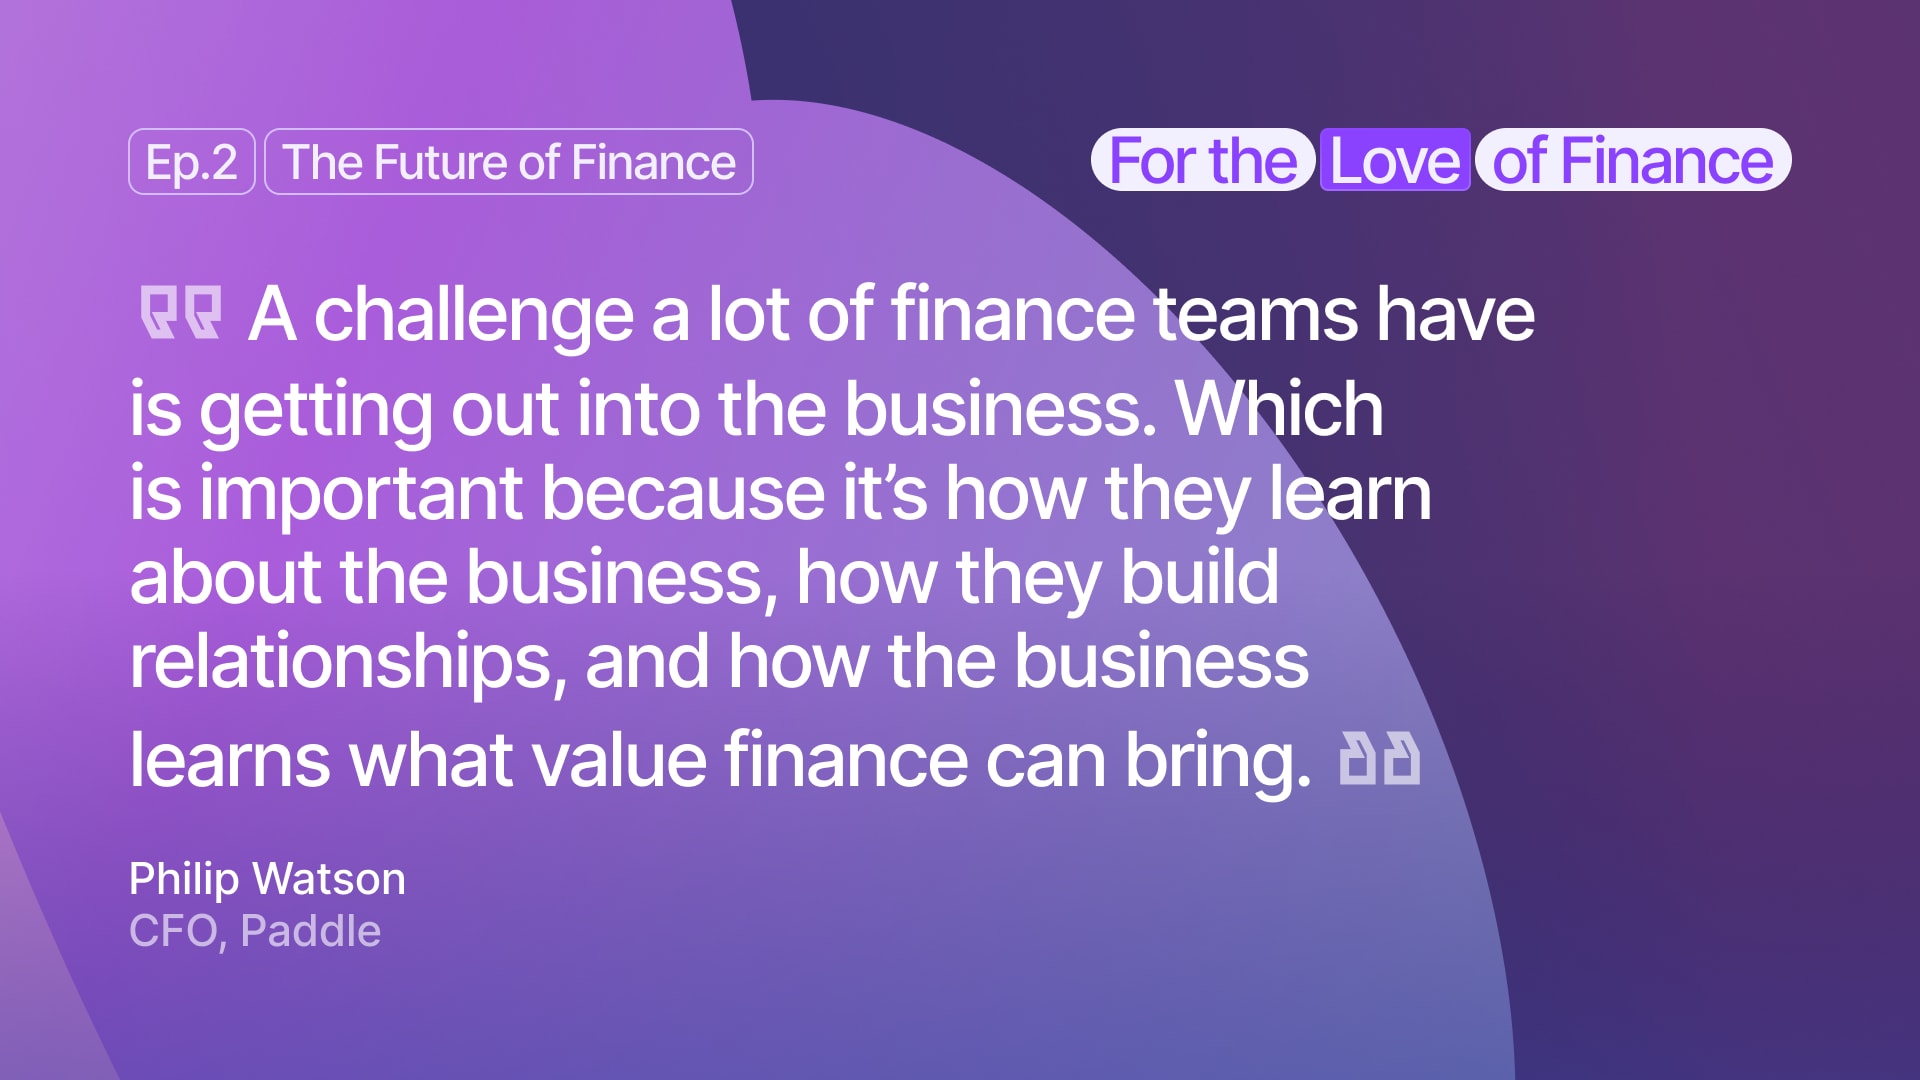 Philip Watson, CFO, on challenges faced by finance teams